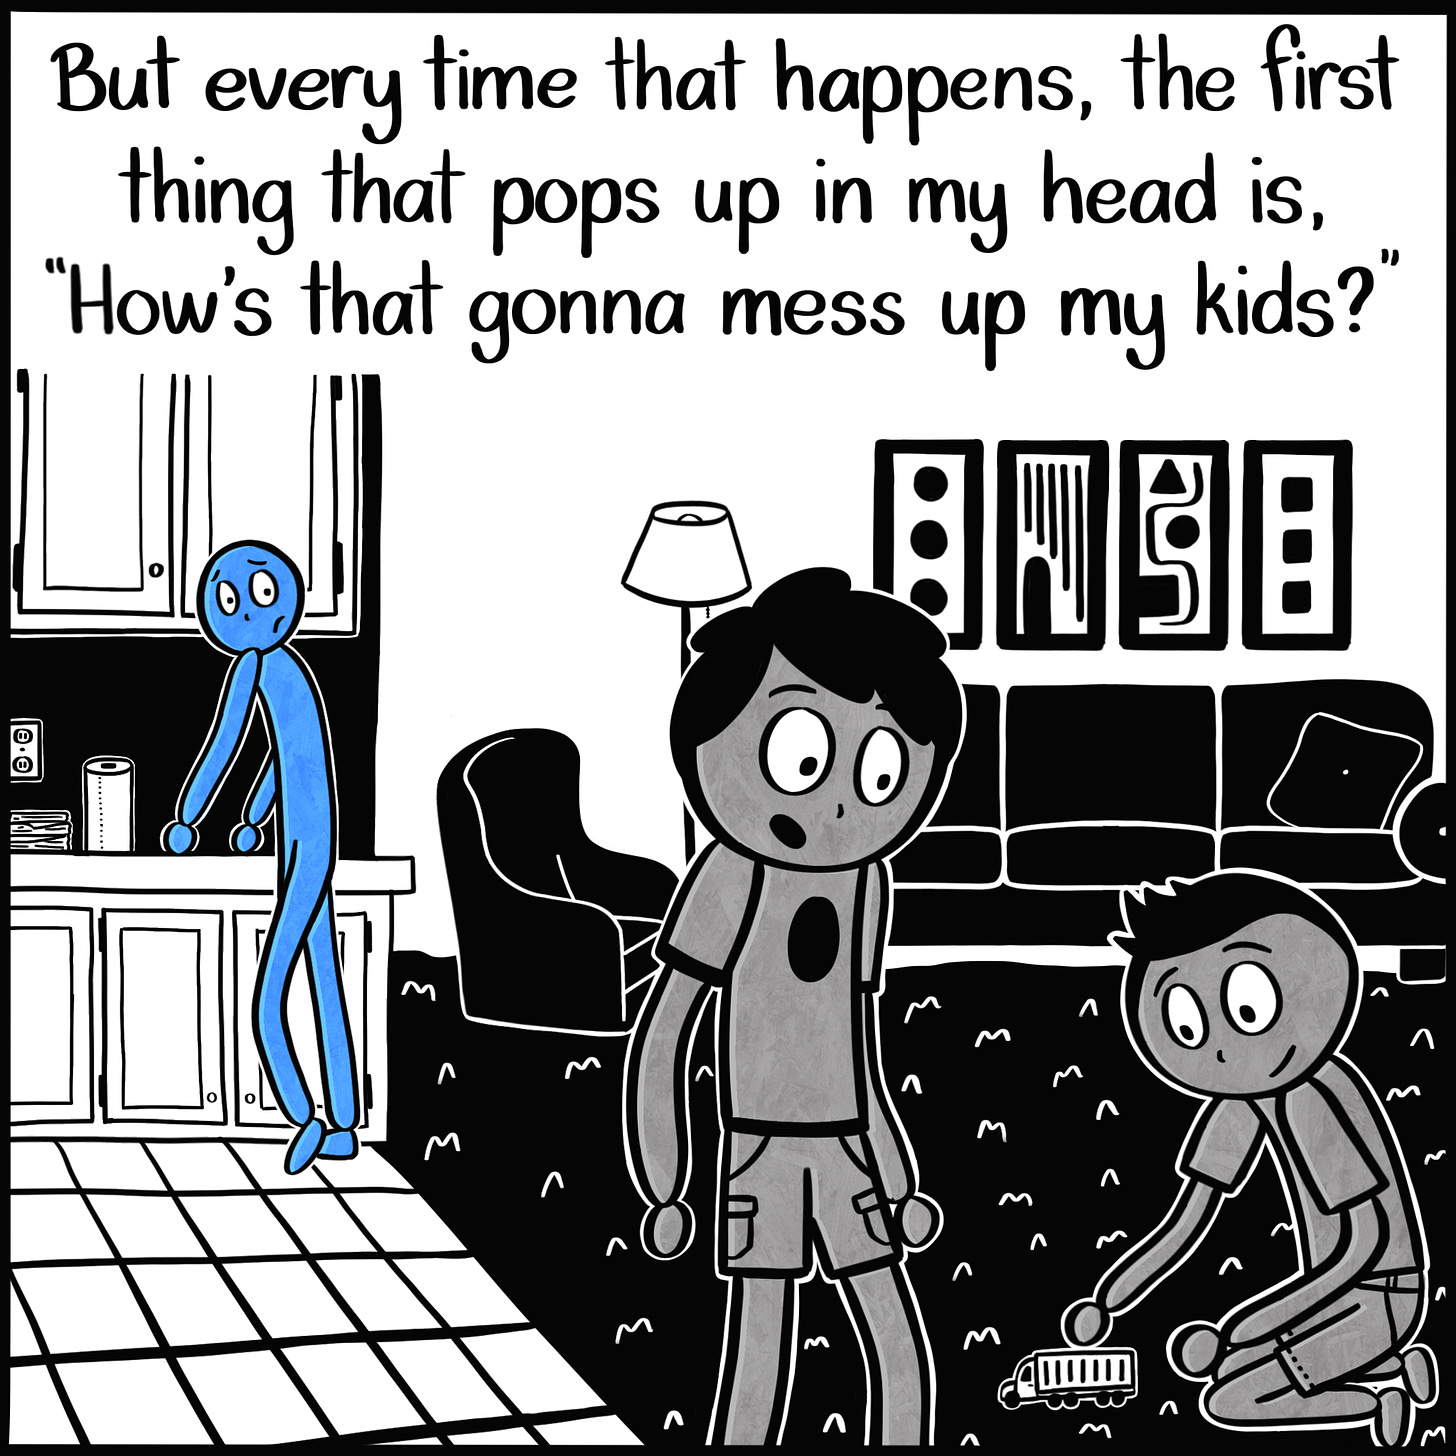 Caption: But every time that happens, the first thing that pops up in my head is, "How's that gonna mess up my kids?" Image: In the foreground, two young boys play with a toy truck in the living room. In the background, the Blue Person is leaning against the kitchen counter, looking back at their children with a troubled look in their eyes.